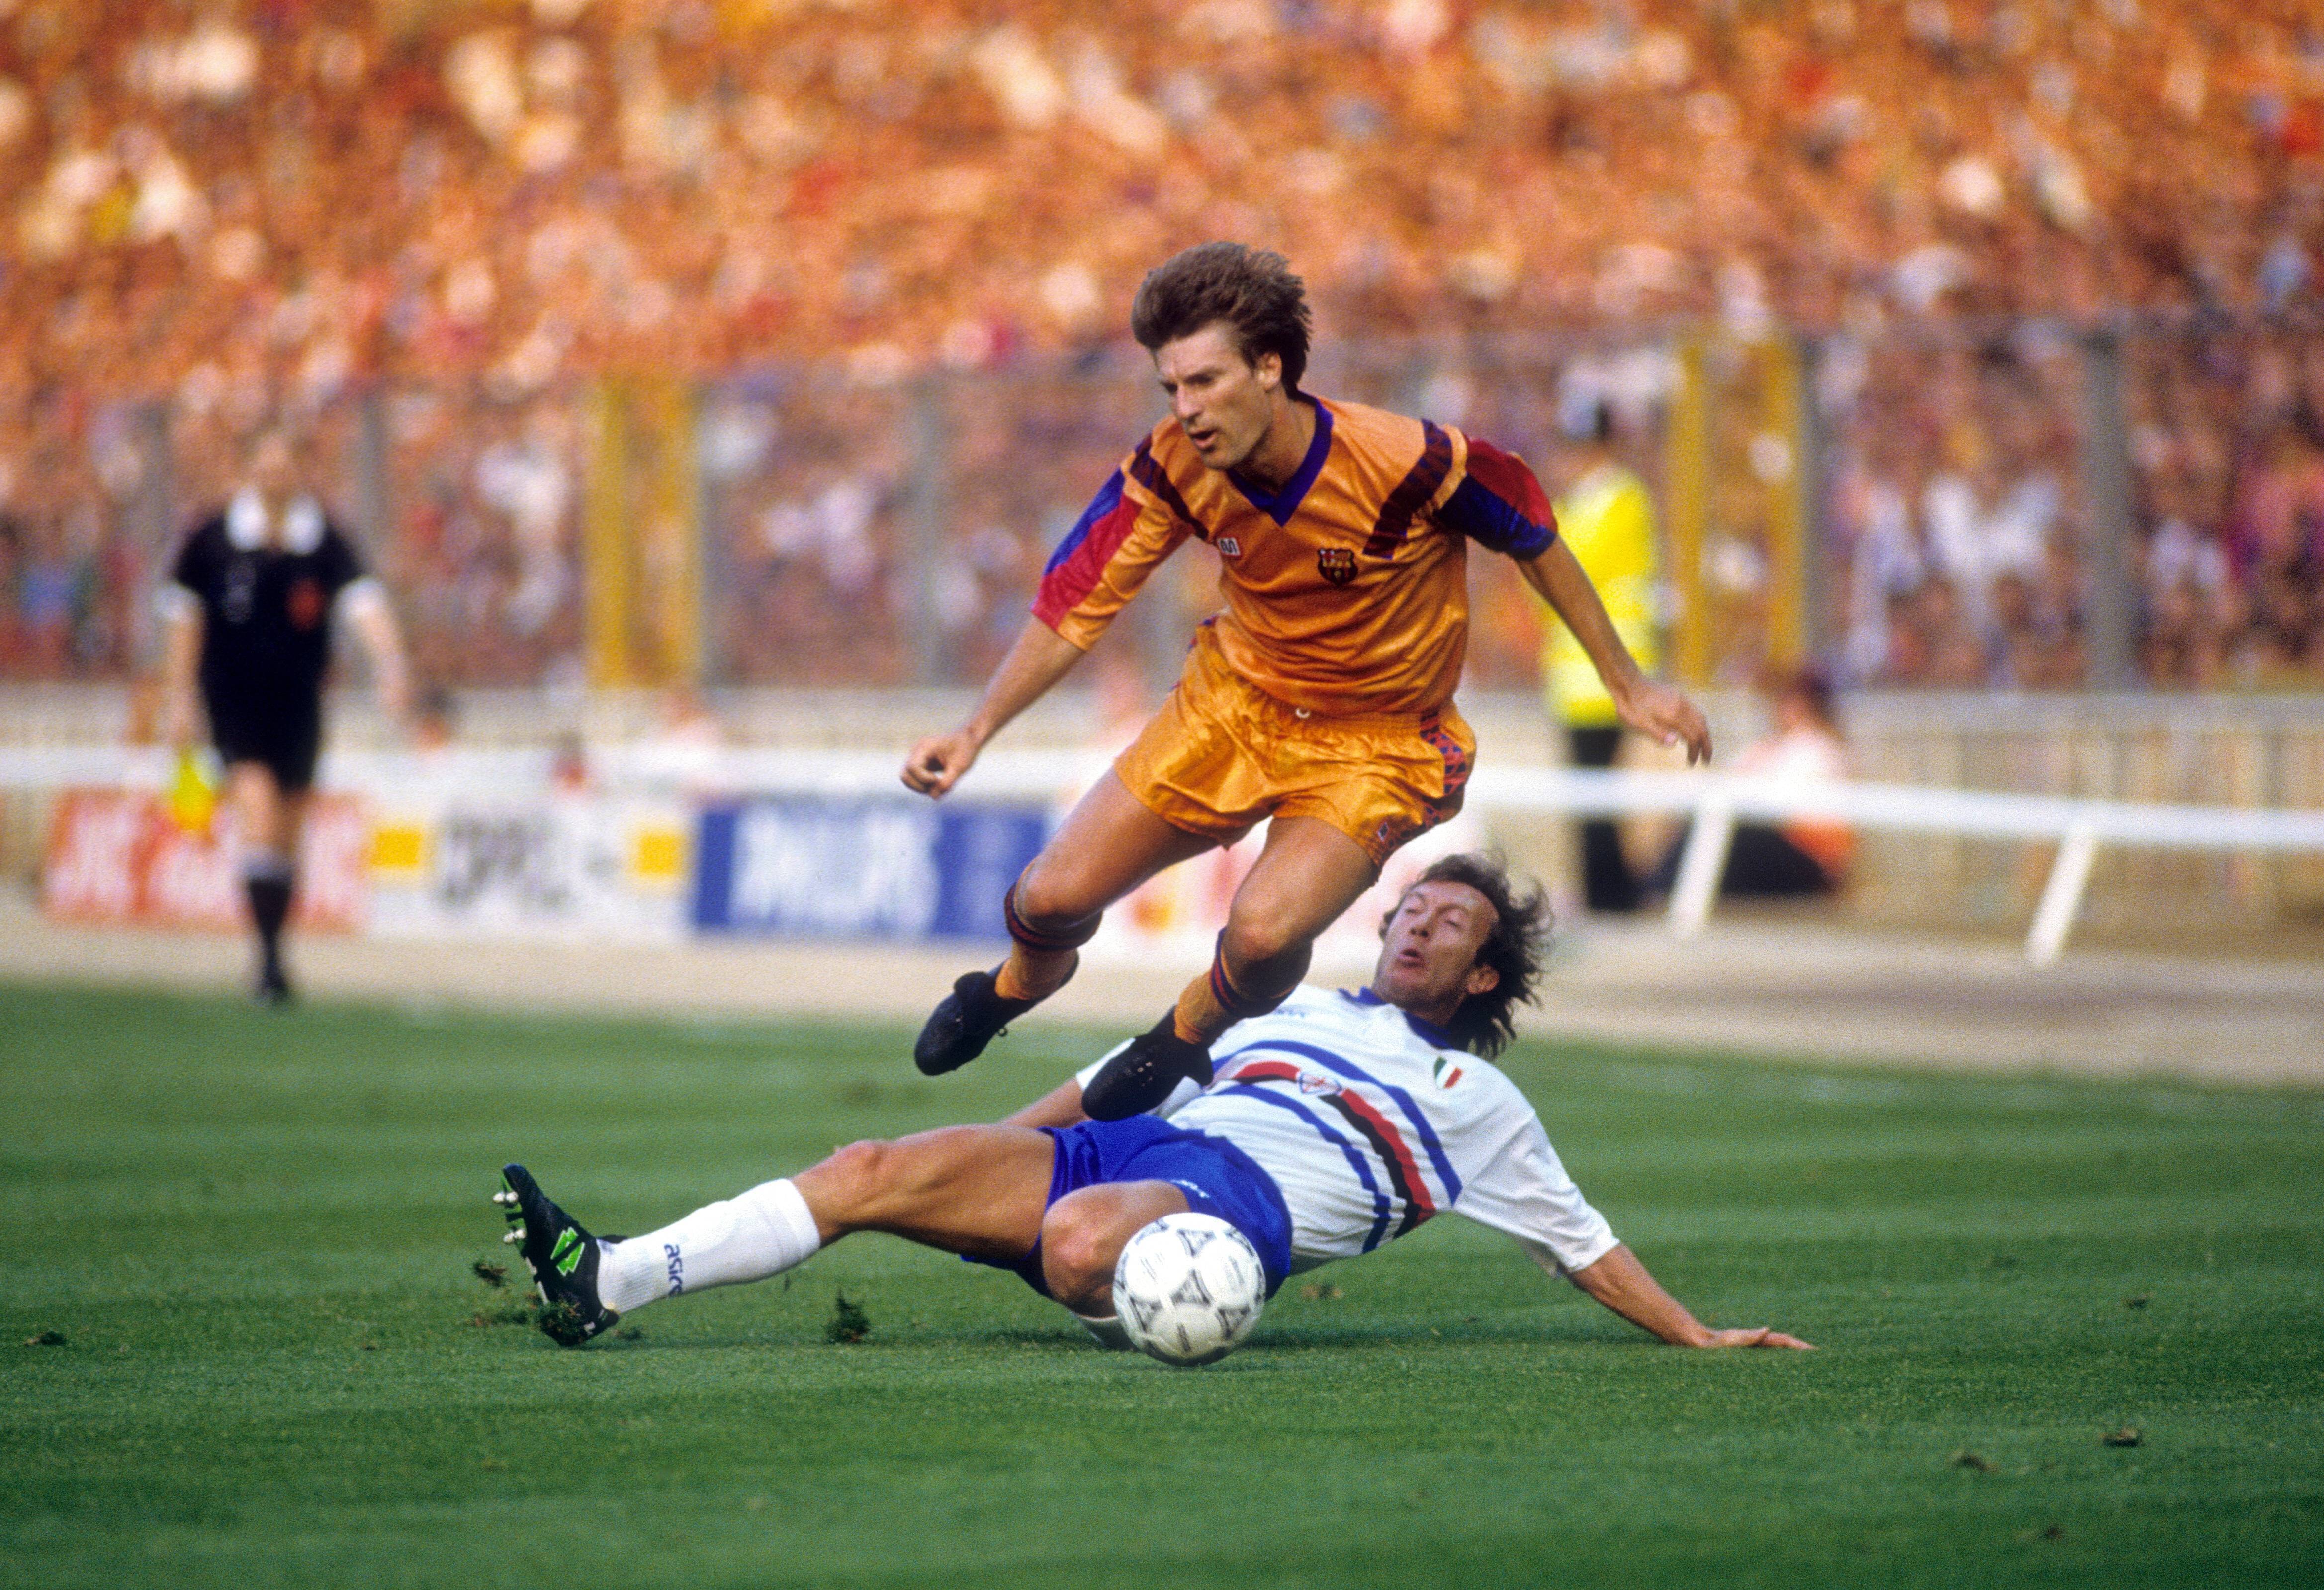 Barcelona's Michael Laudrup evades the challenge of Sampdoria's Moreno Mannini in the 1992 Europea Cup final at Wembley.